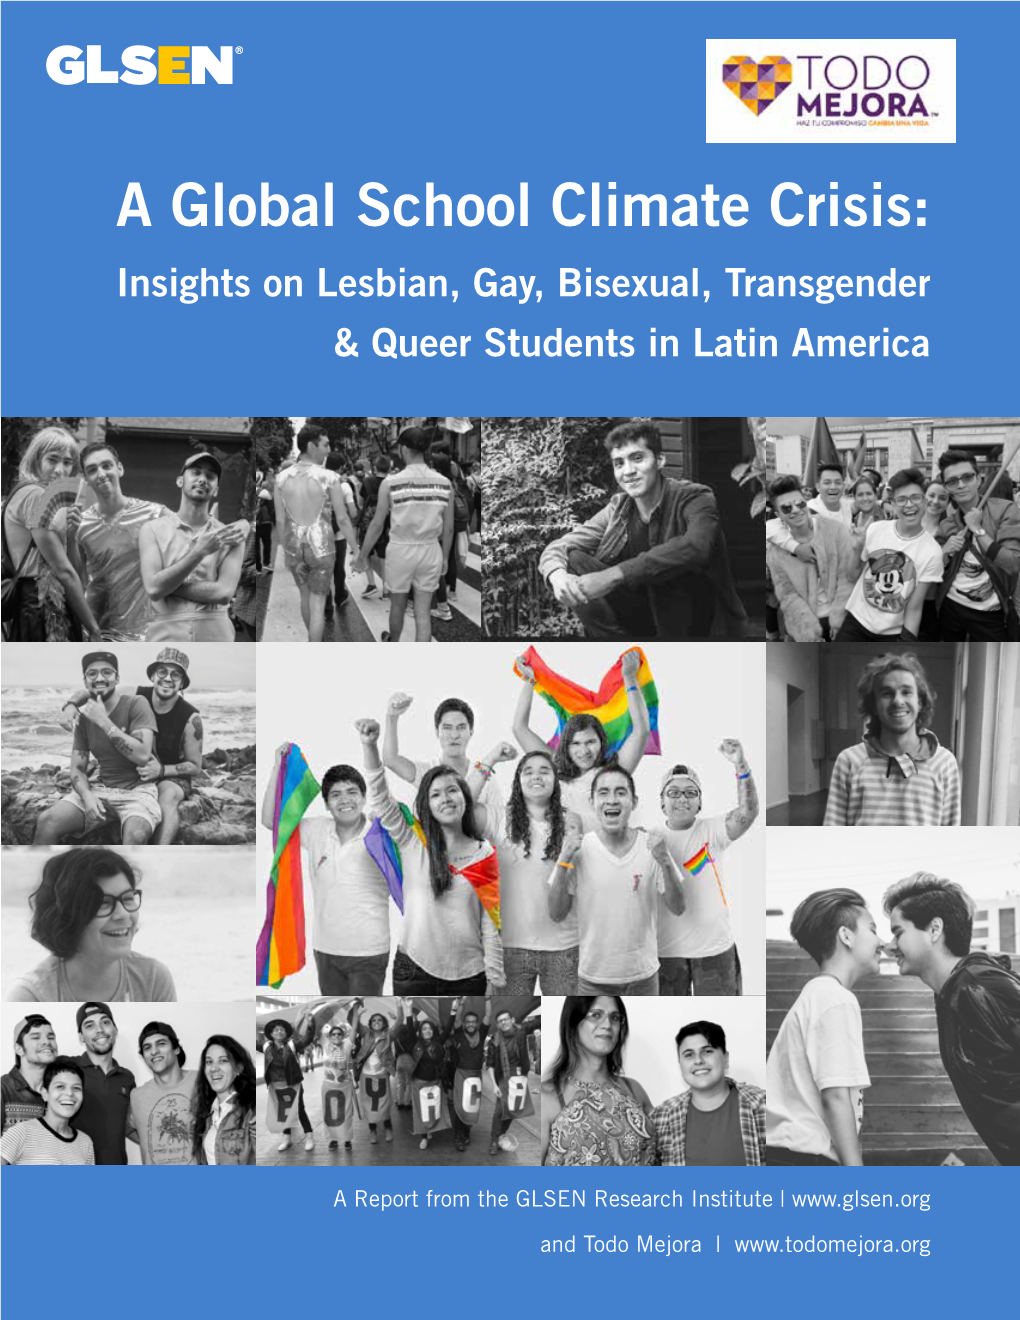 A Global School Climate Crisis: Insights on Lesbian, Gay, Bisexual, Transgender & Queer Students in Latin America